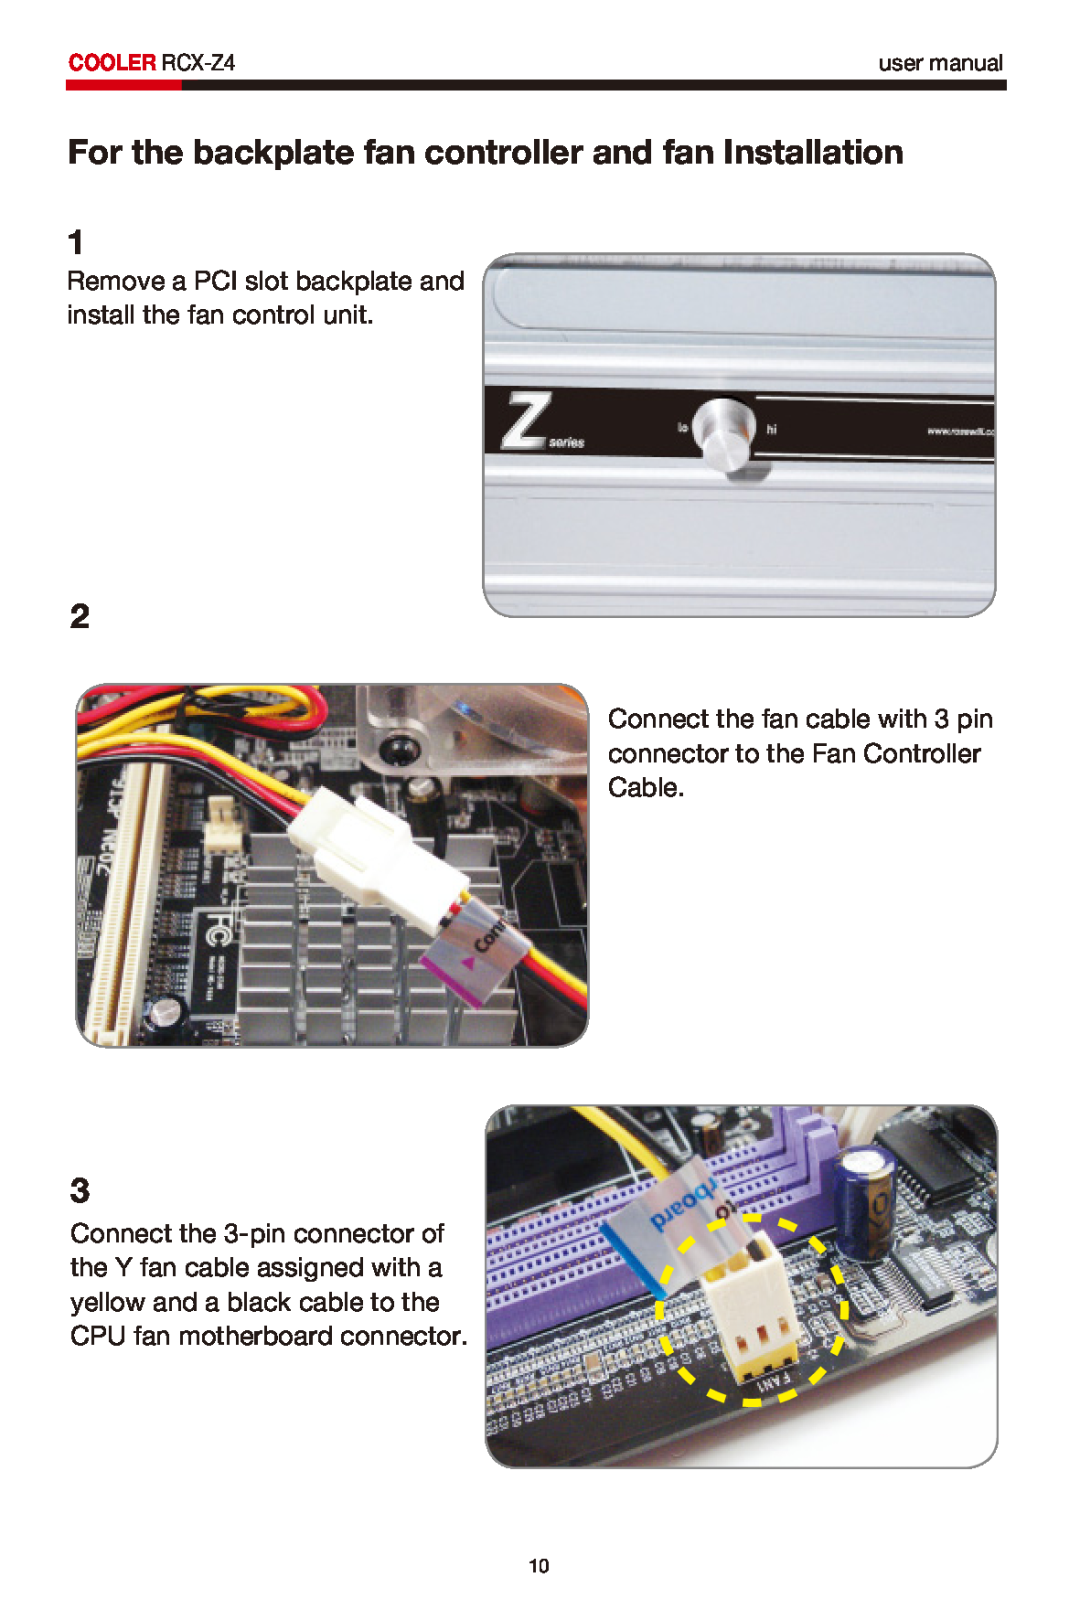 Rosewill For the backplate fan controller and fan Installation, COOLER RCX-Z4, user manual 